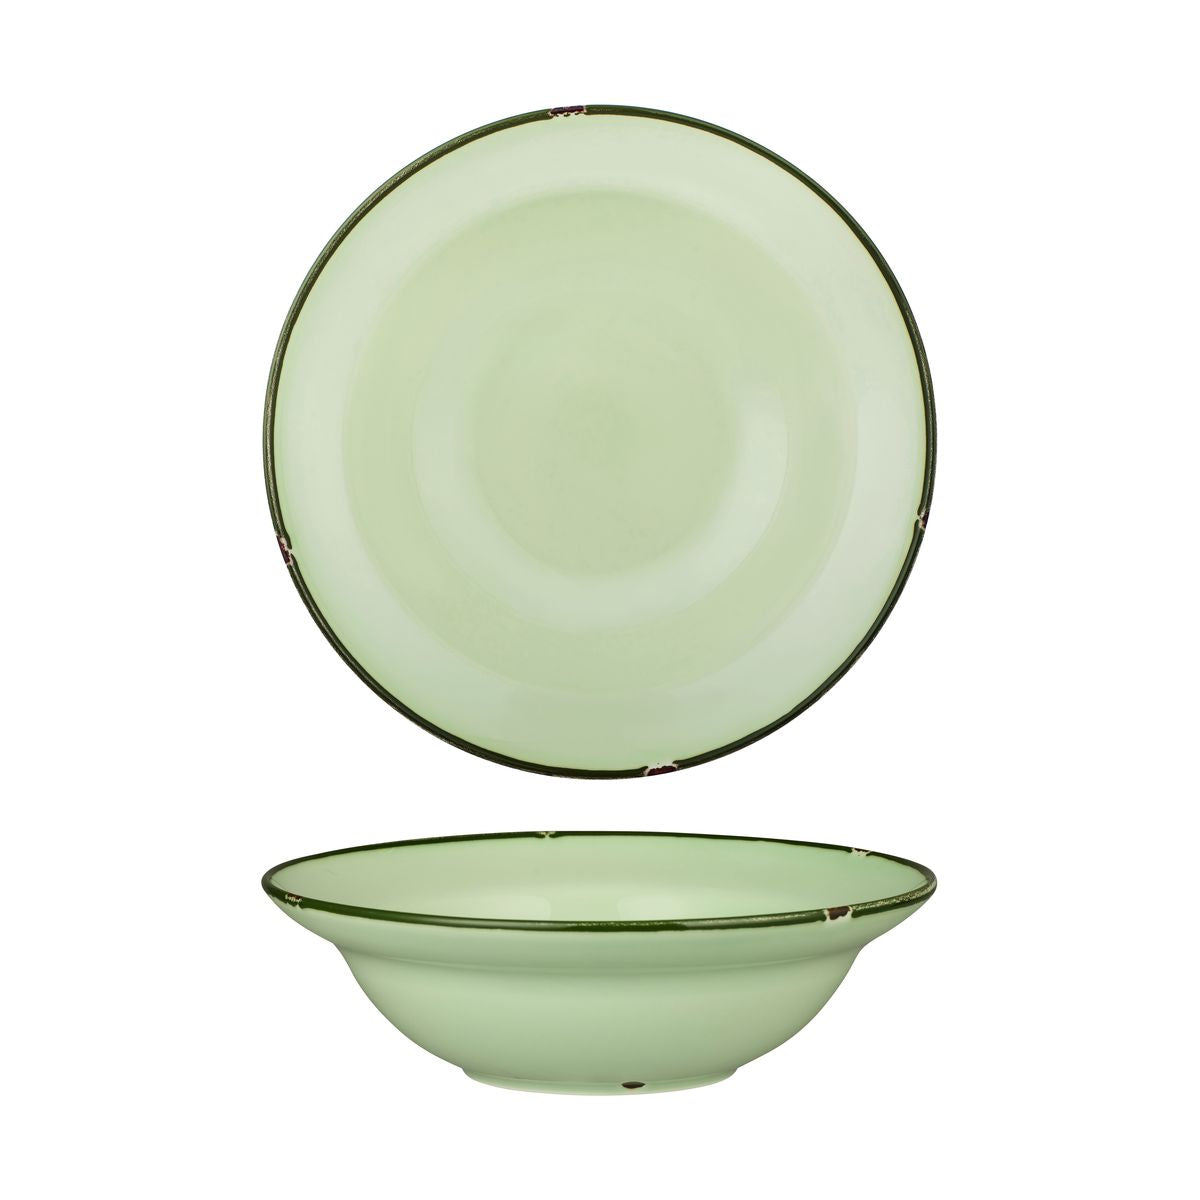 Deep Bowl Plate - 240mm, Tintin Green & Green from Luzerne. made out of Ceramic and sold in boxes of 12. Hospitality quality at wholesale price with The Flying Fork! 